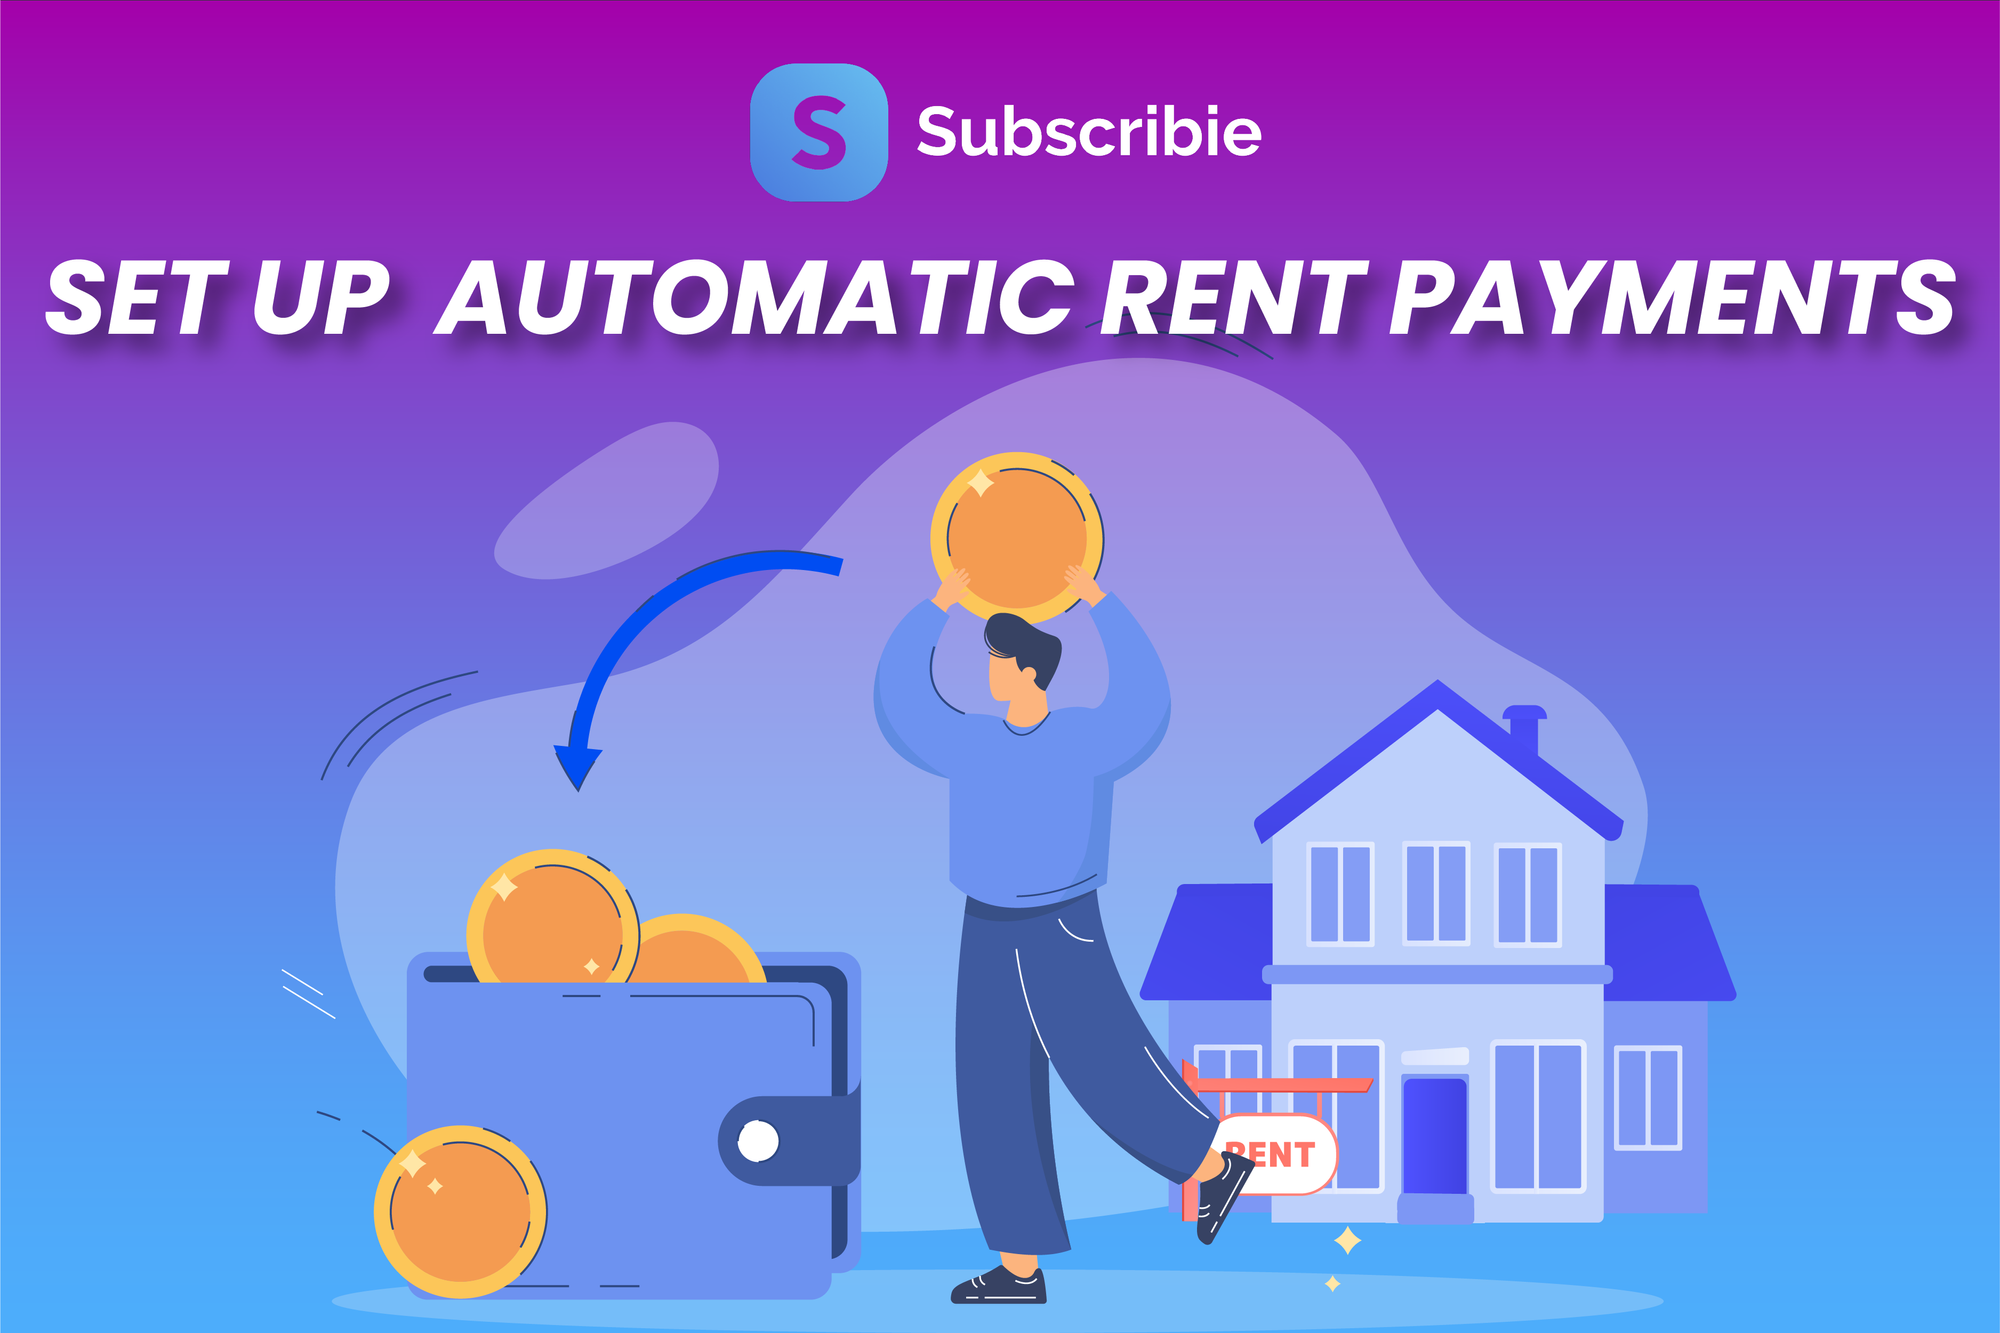 How to Set up Automatic Rent Payments in less than 5 minutes